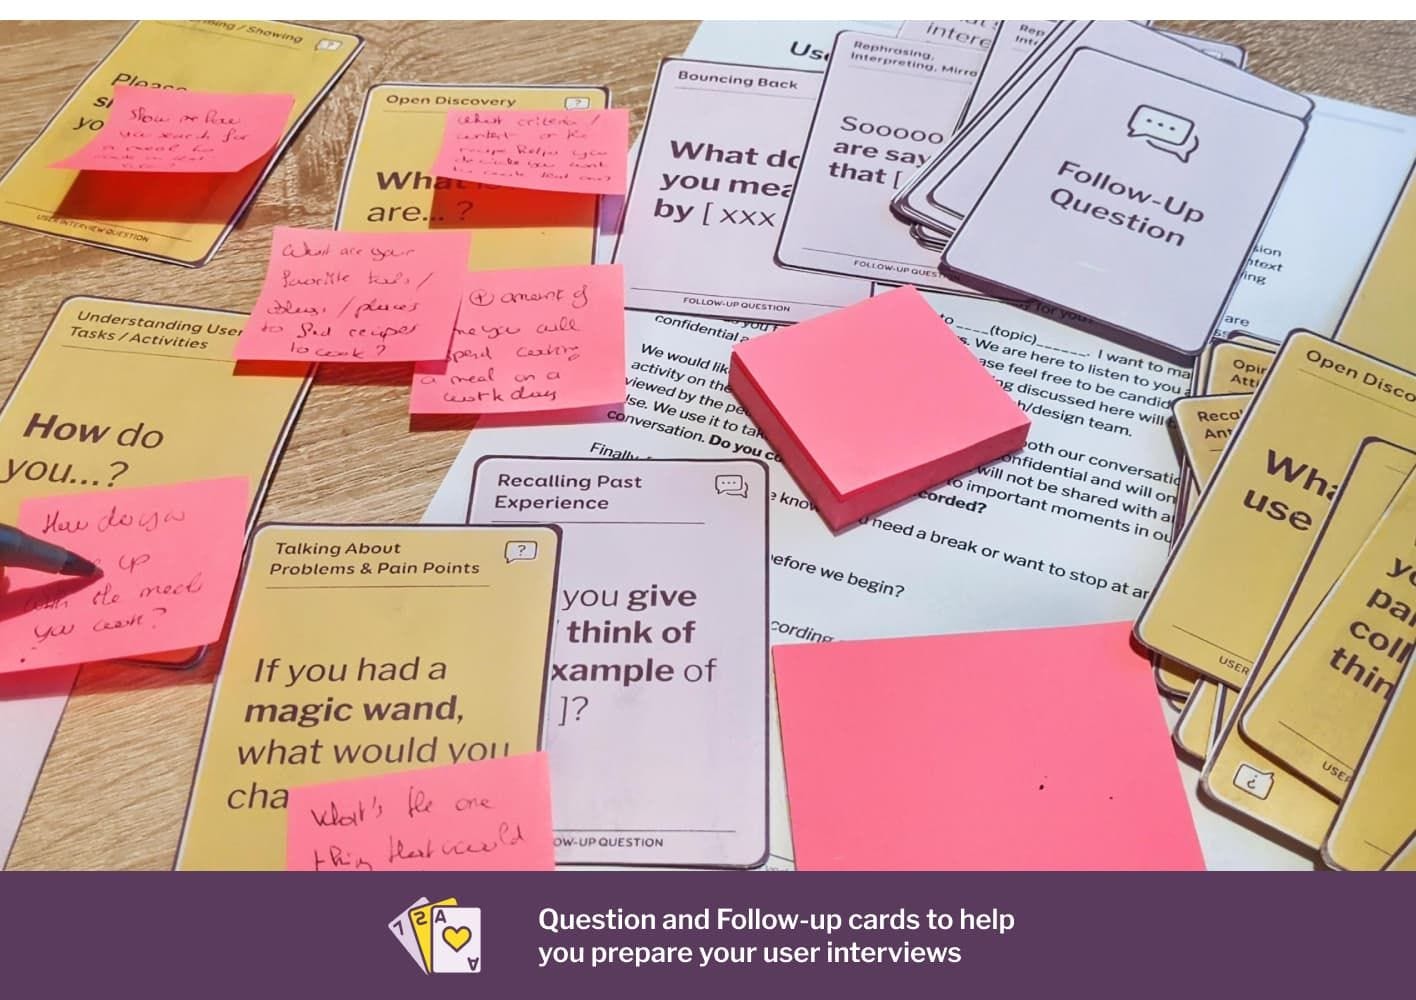 Questions and follow-up cards to help you prepare your user interviews.